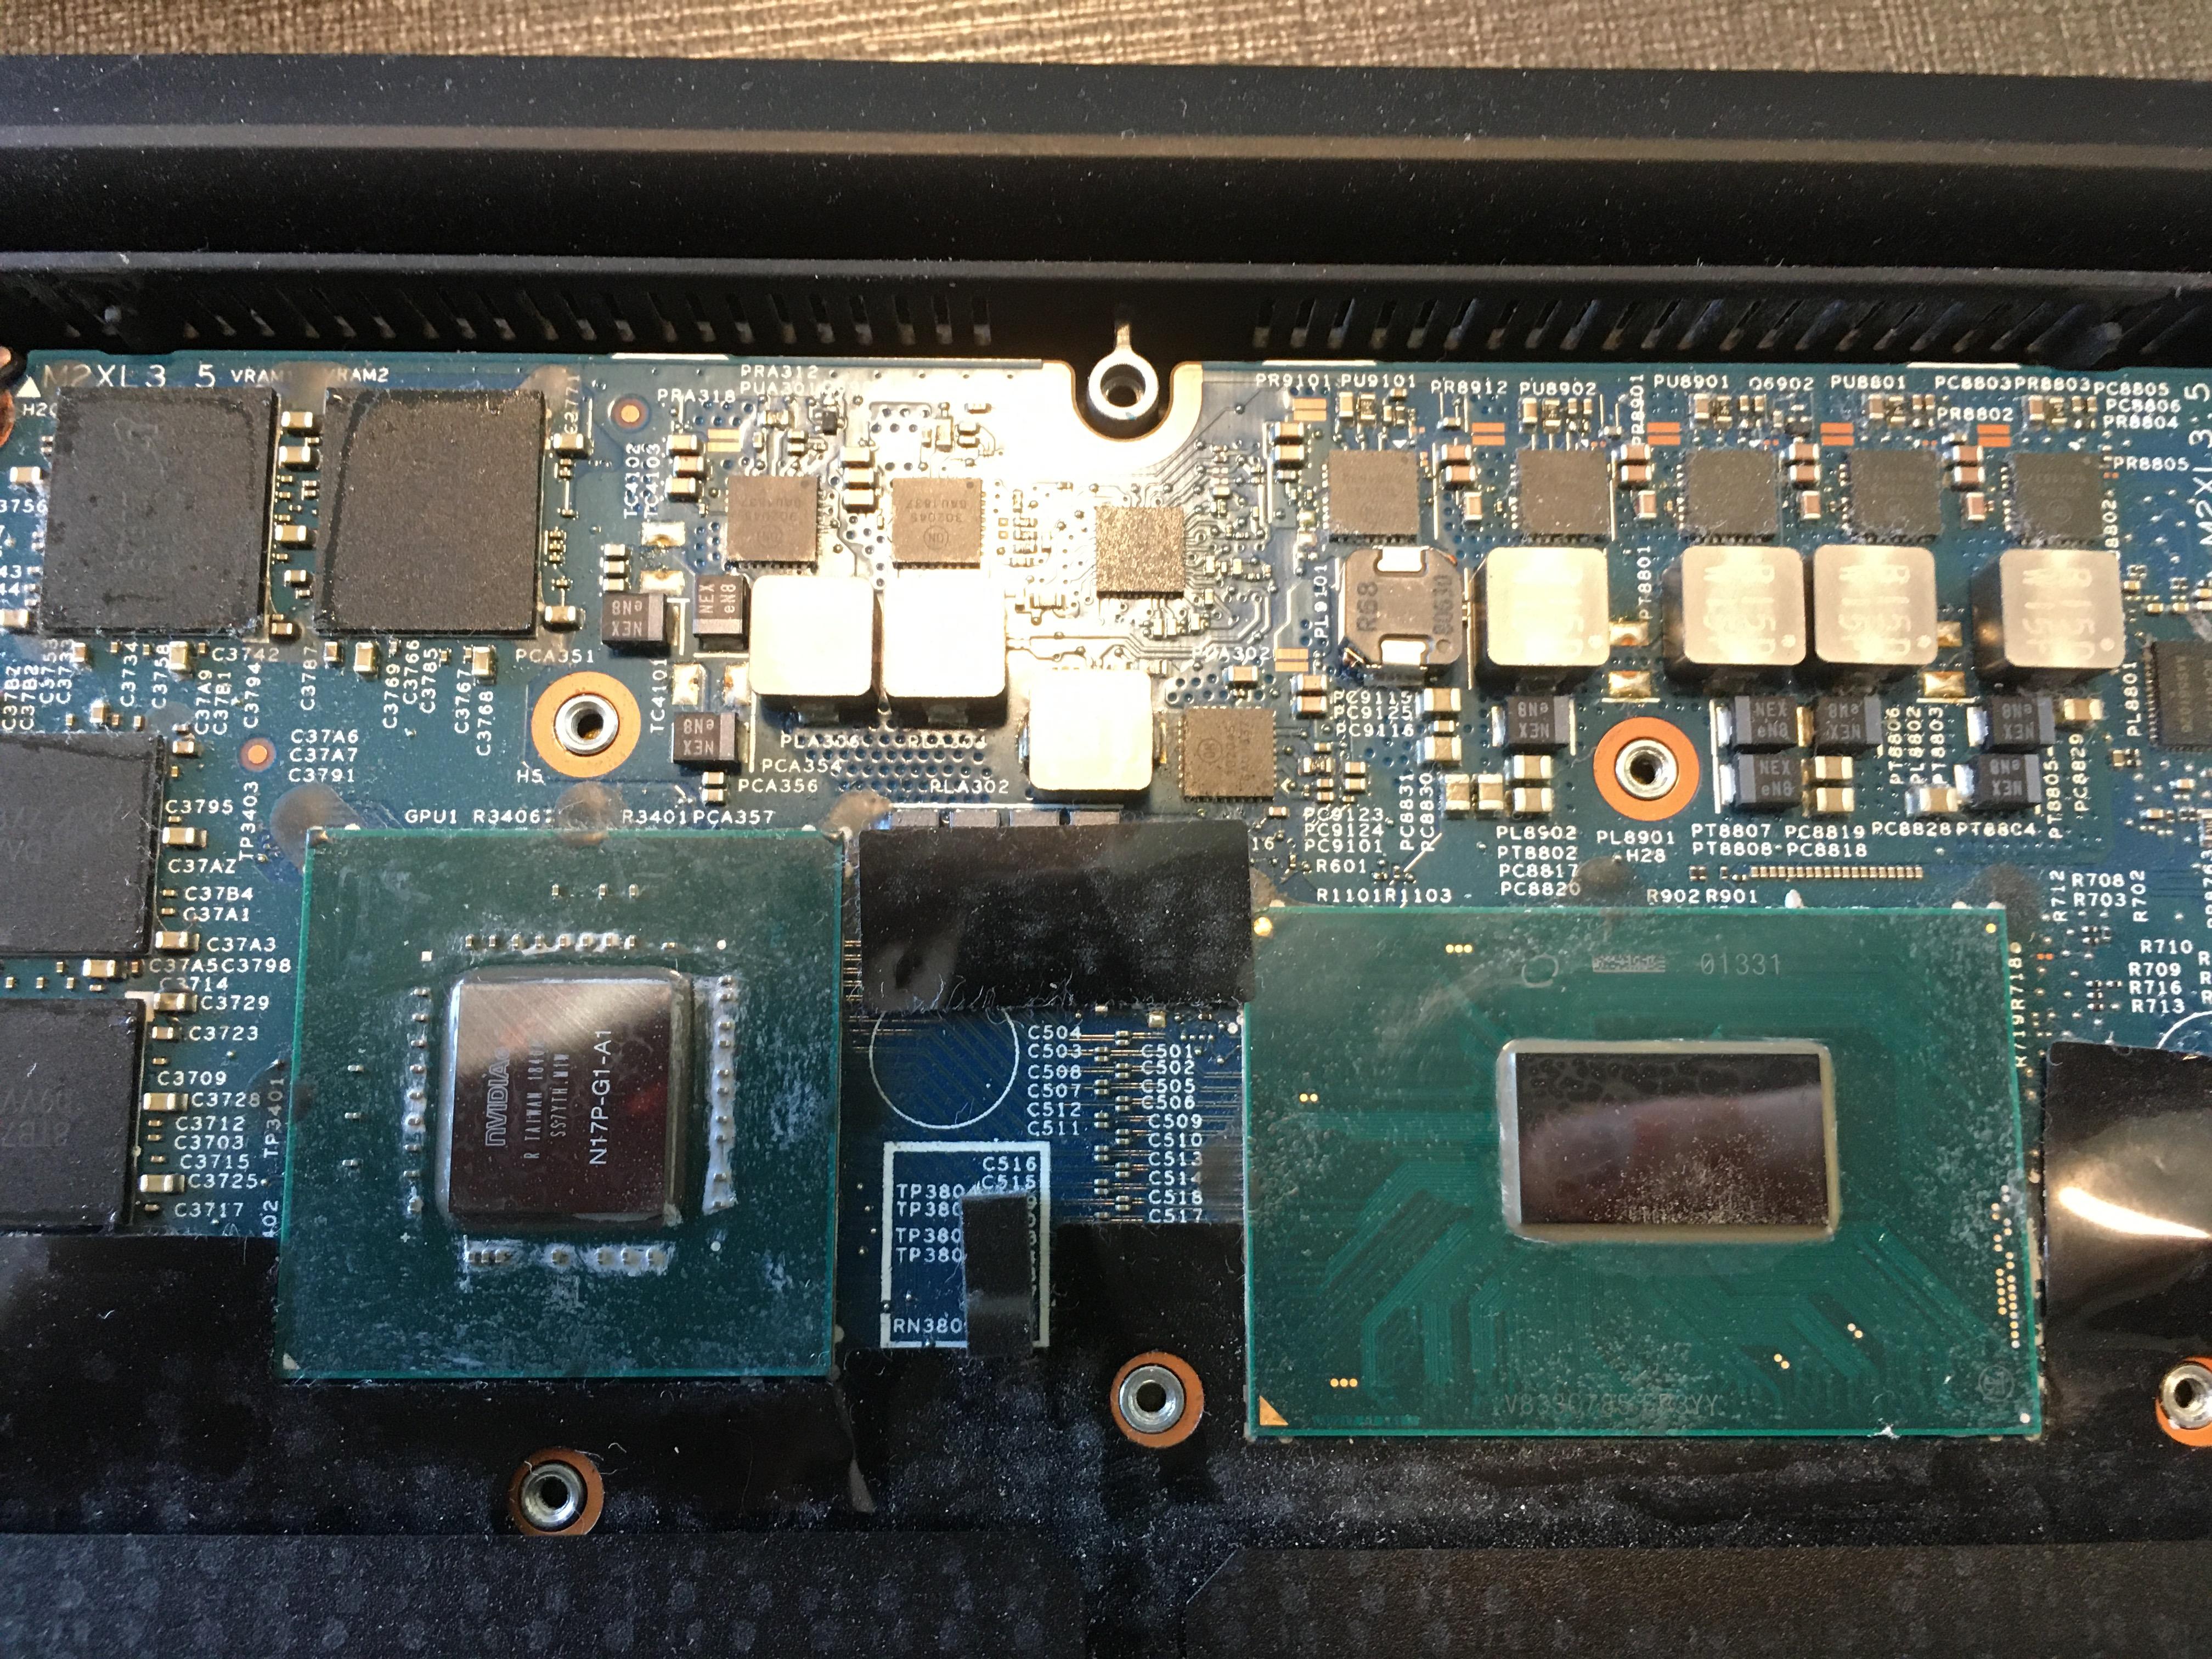 The GPU and CPU dies on the motherboard; about 1 by 1 cm and 1 by 3 cm respectively